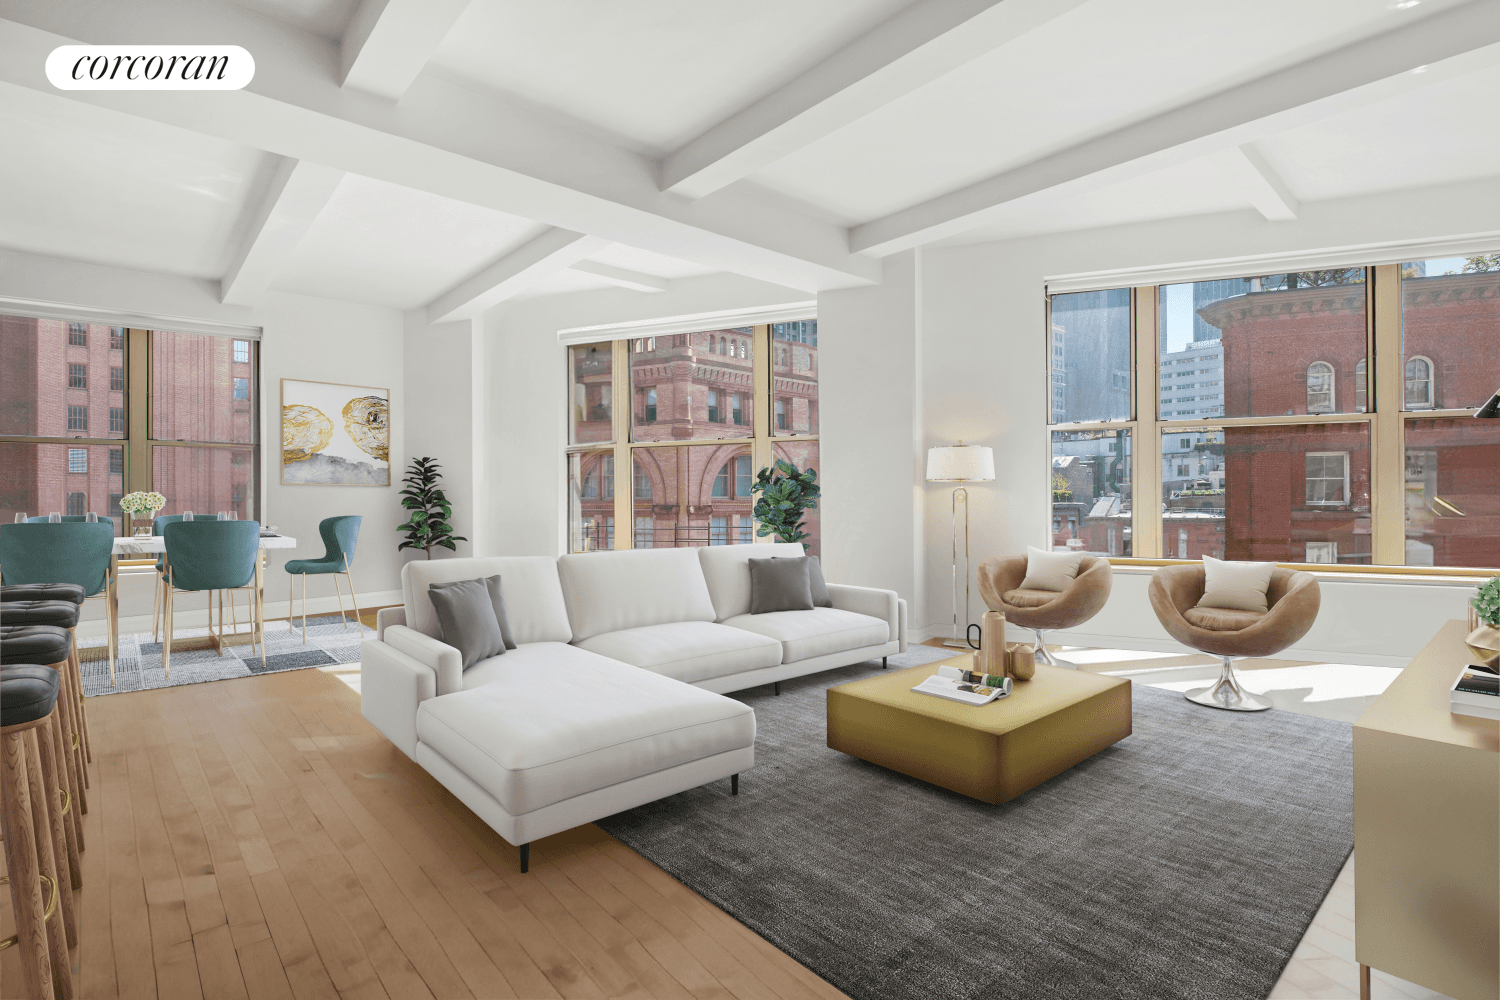 Welcome to 166 Duane Street, Apartment 5A a luxurious and oversized 3 Bedroom Loft overlooking Duane Park in the heart of Tribeca !